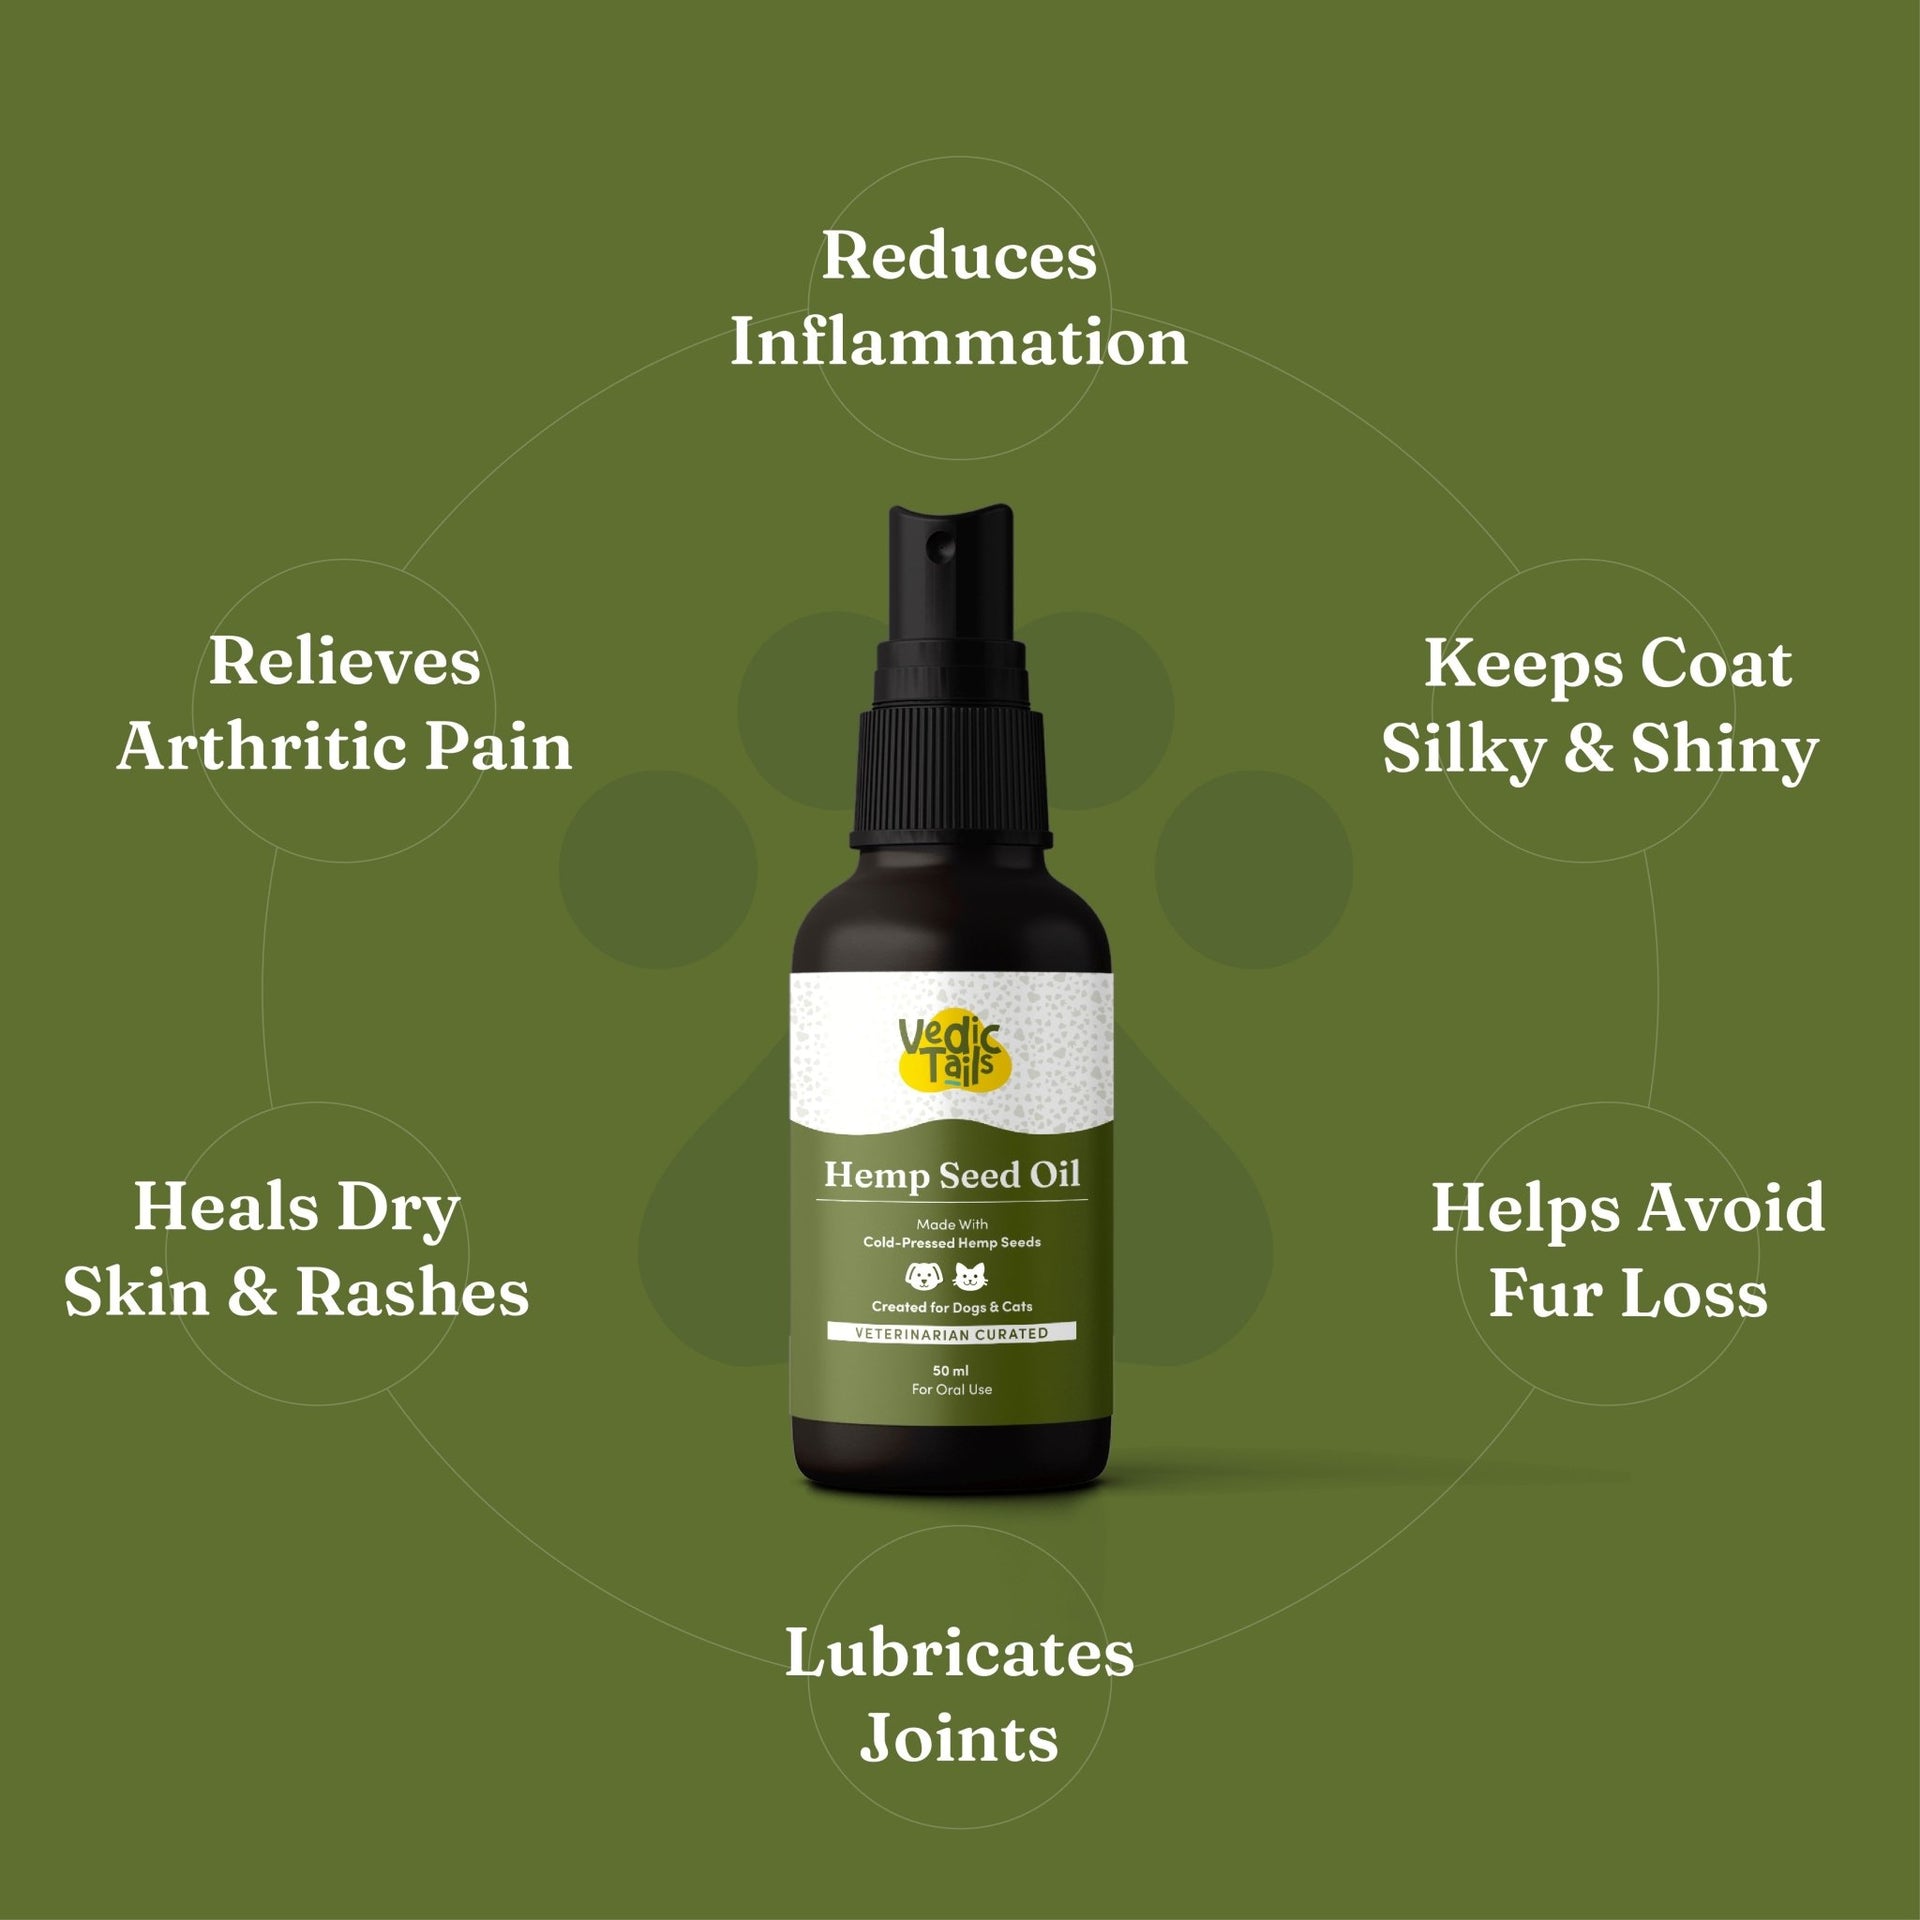 Vedic Tails Hemp Seed Oil for Dogs Cats 50ml | Topical, Oral - CBD Store India